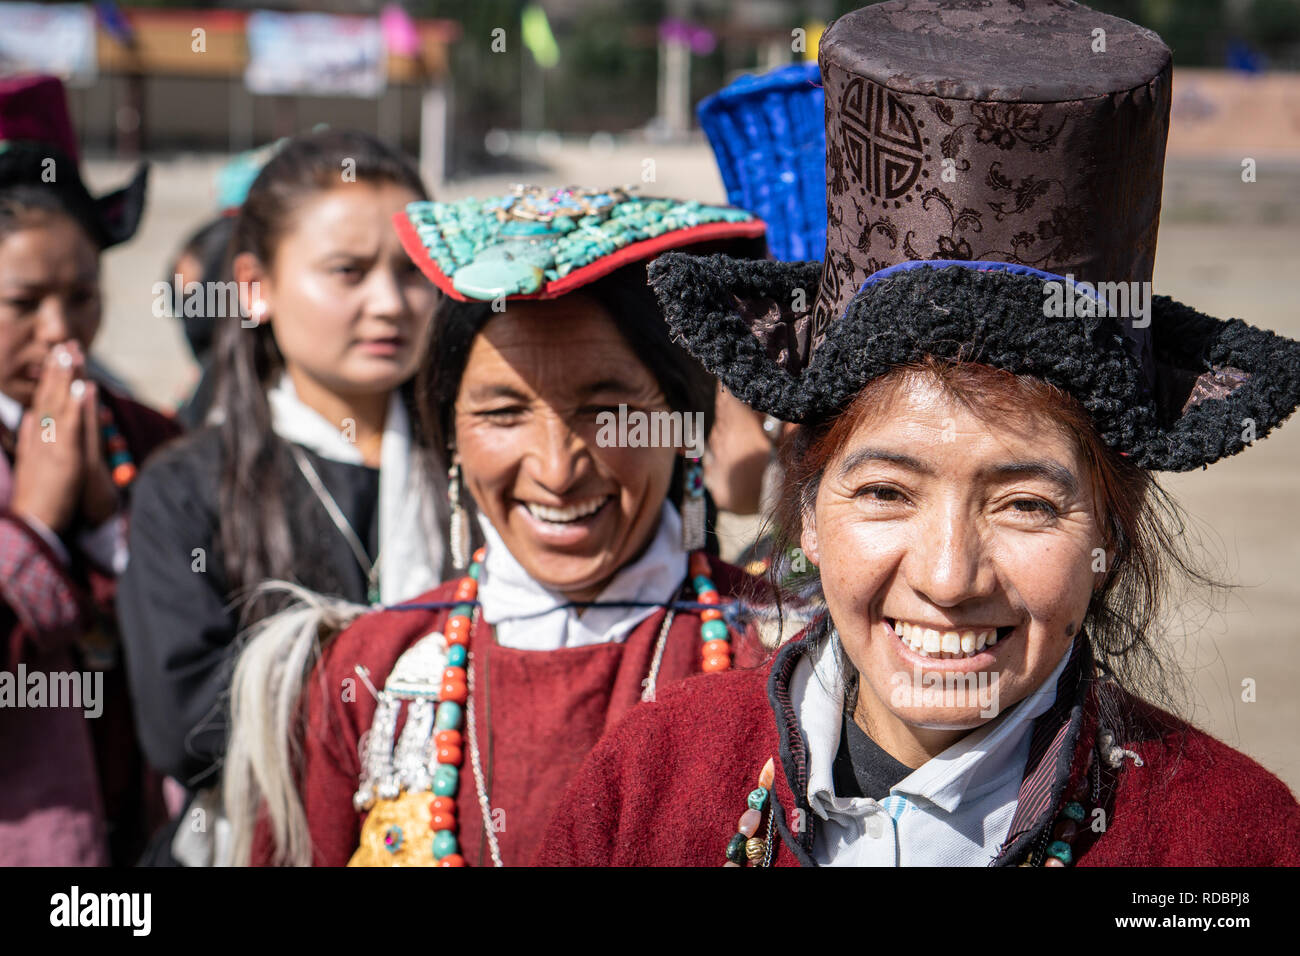 Ladakh, India - September 4, 2018: Portrait of smiling ethnic Indian woman in traditional clothes on festival in Ladakh. Illustrative editorial. Stock Photo